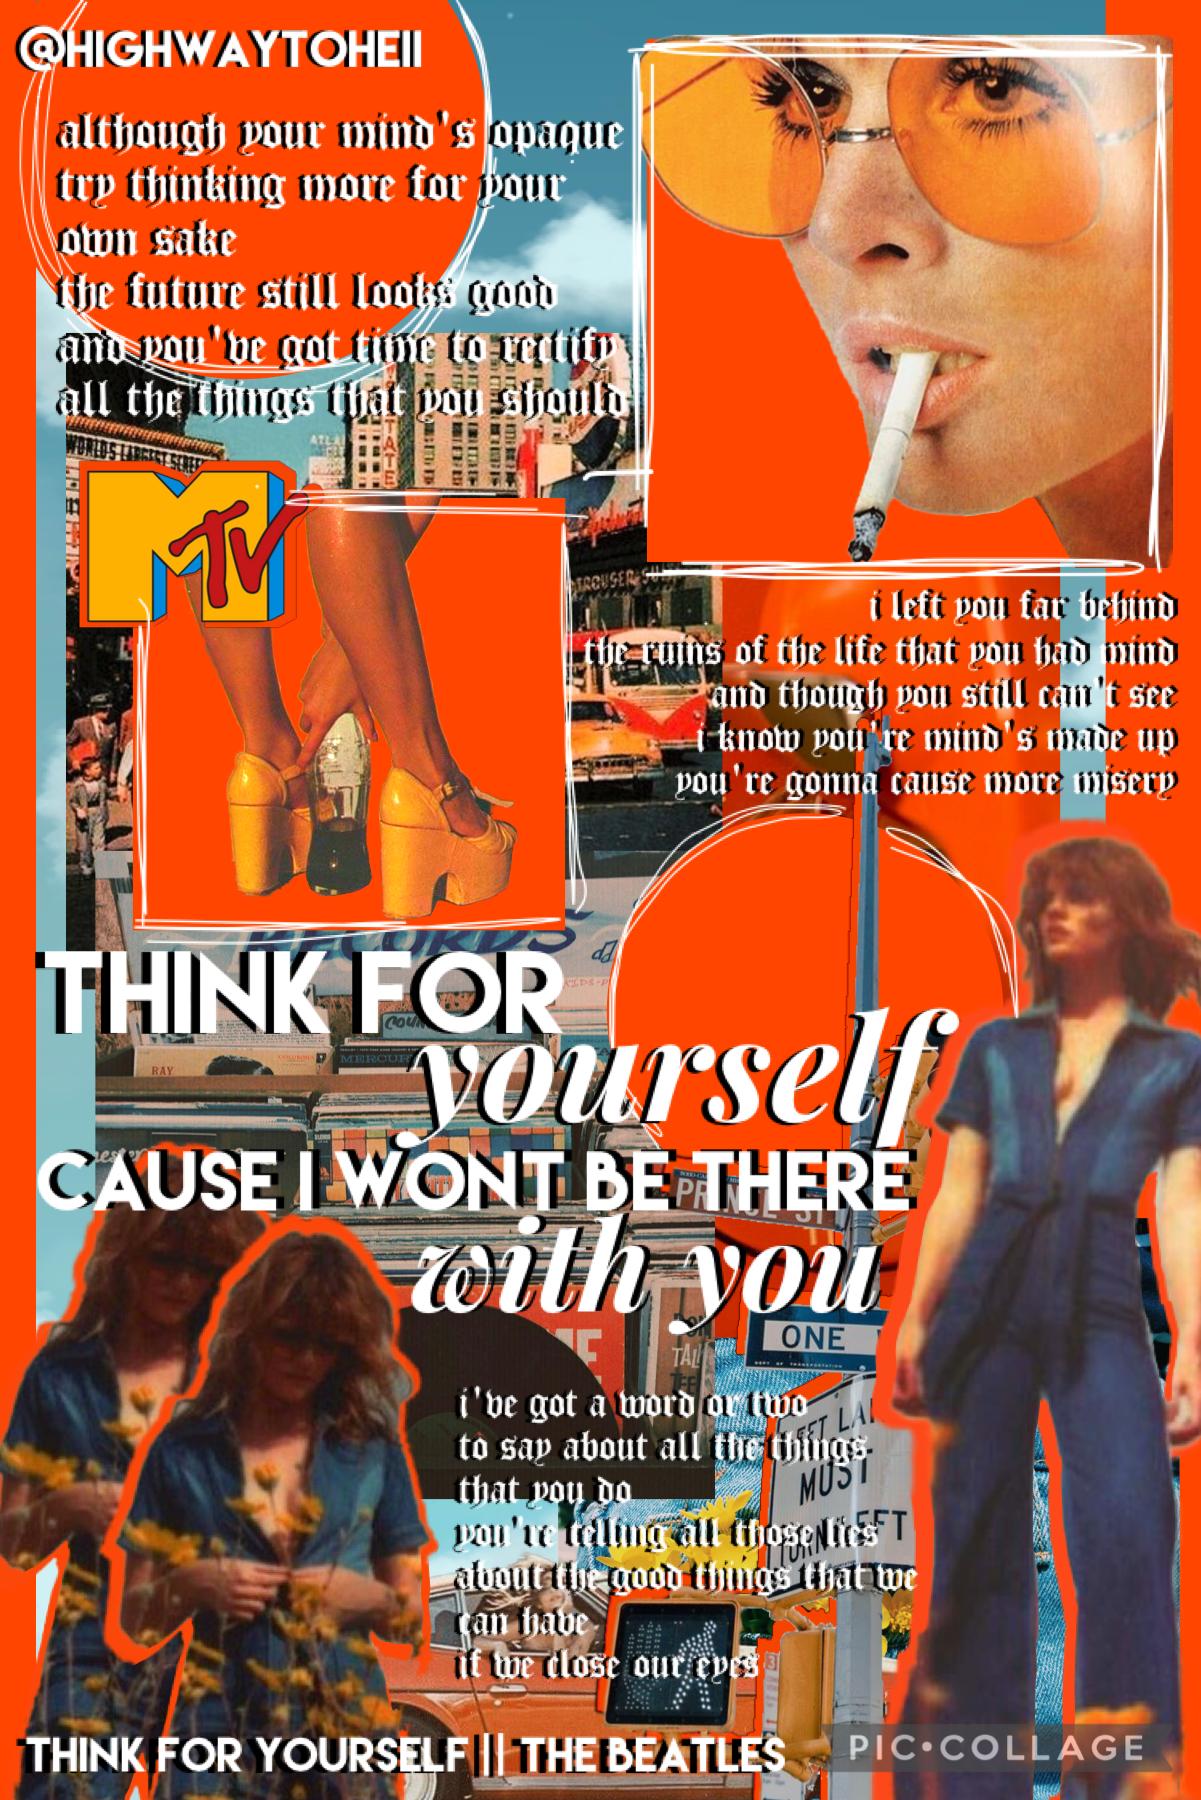 Think For Yourself || The Beatles

@comments